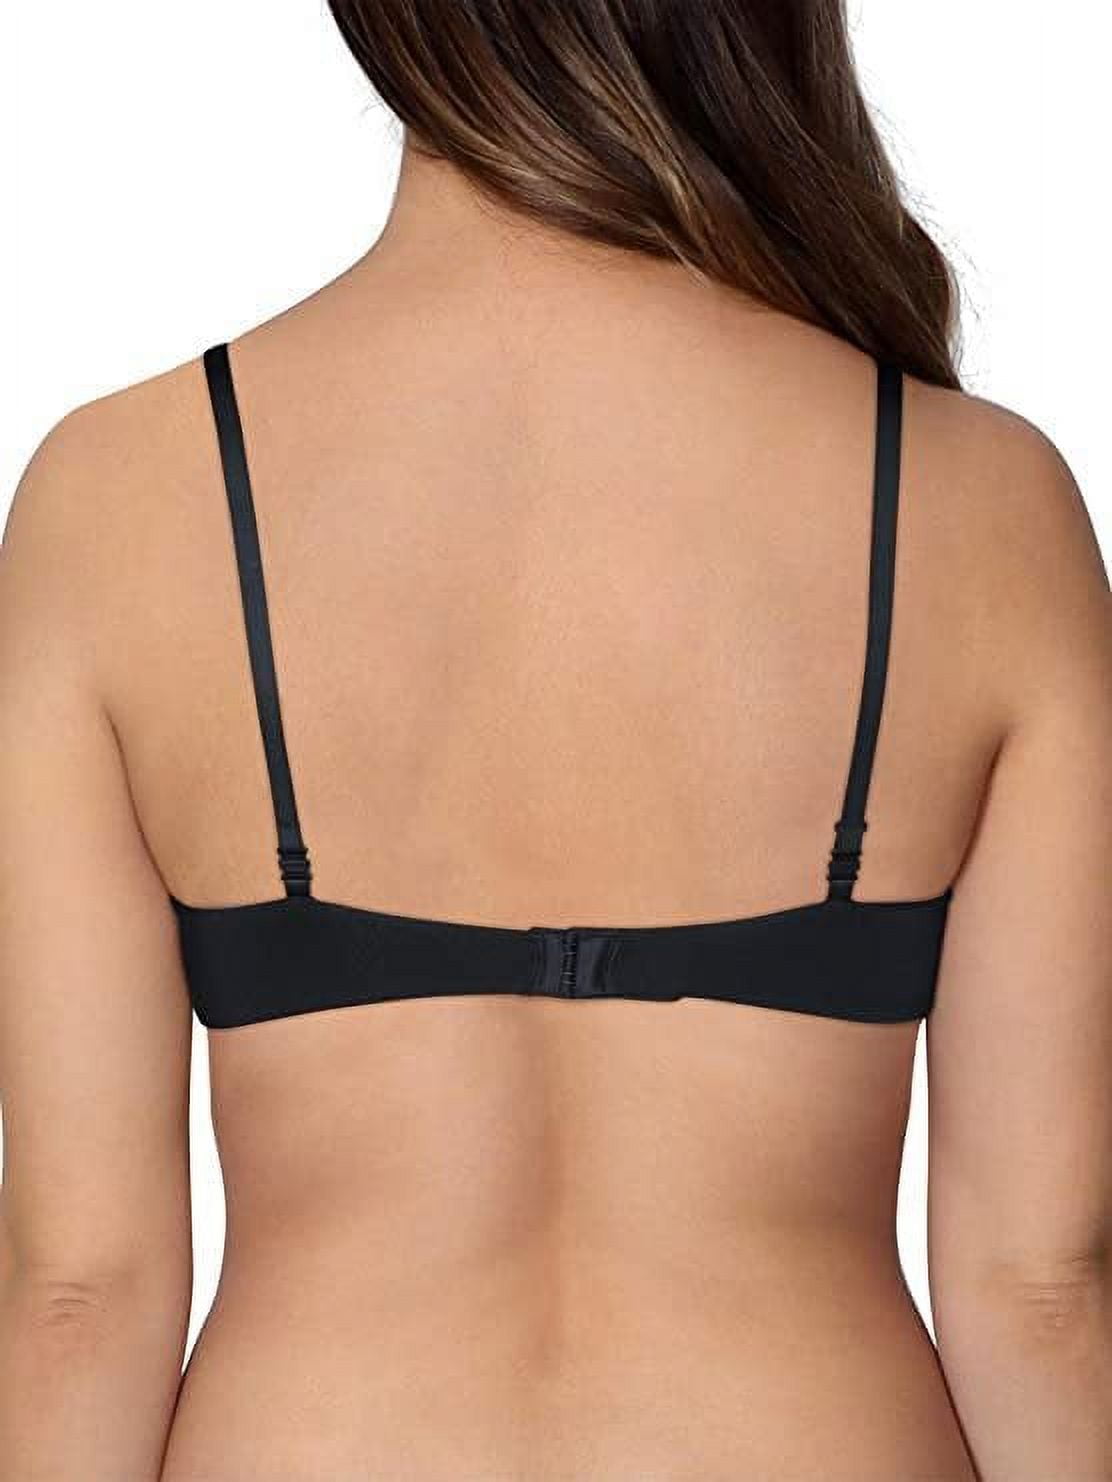 Fruit of the Loom Women's Breathable Cami Bra with Convertible Straps  2-Pack, Black, 34DD 